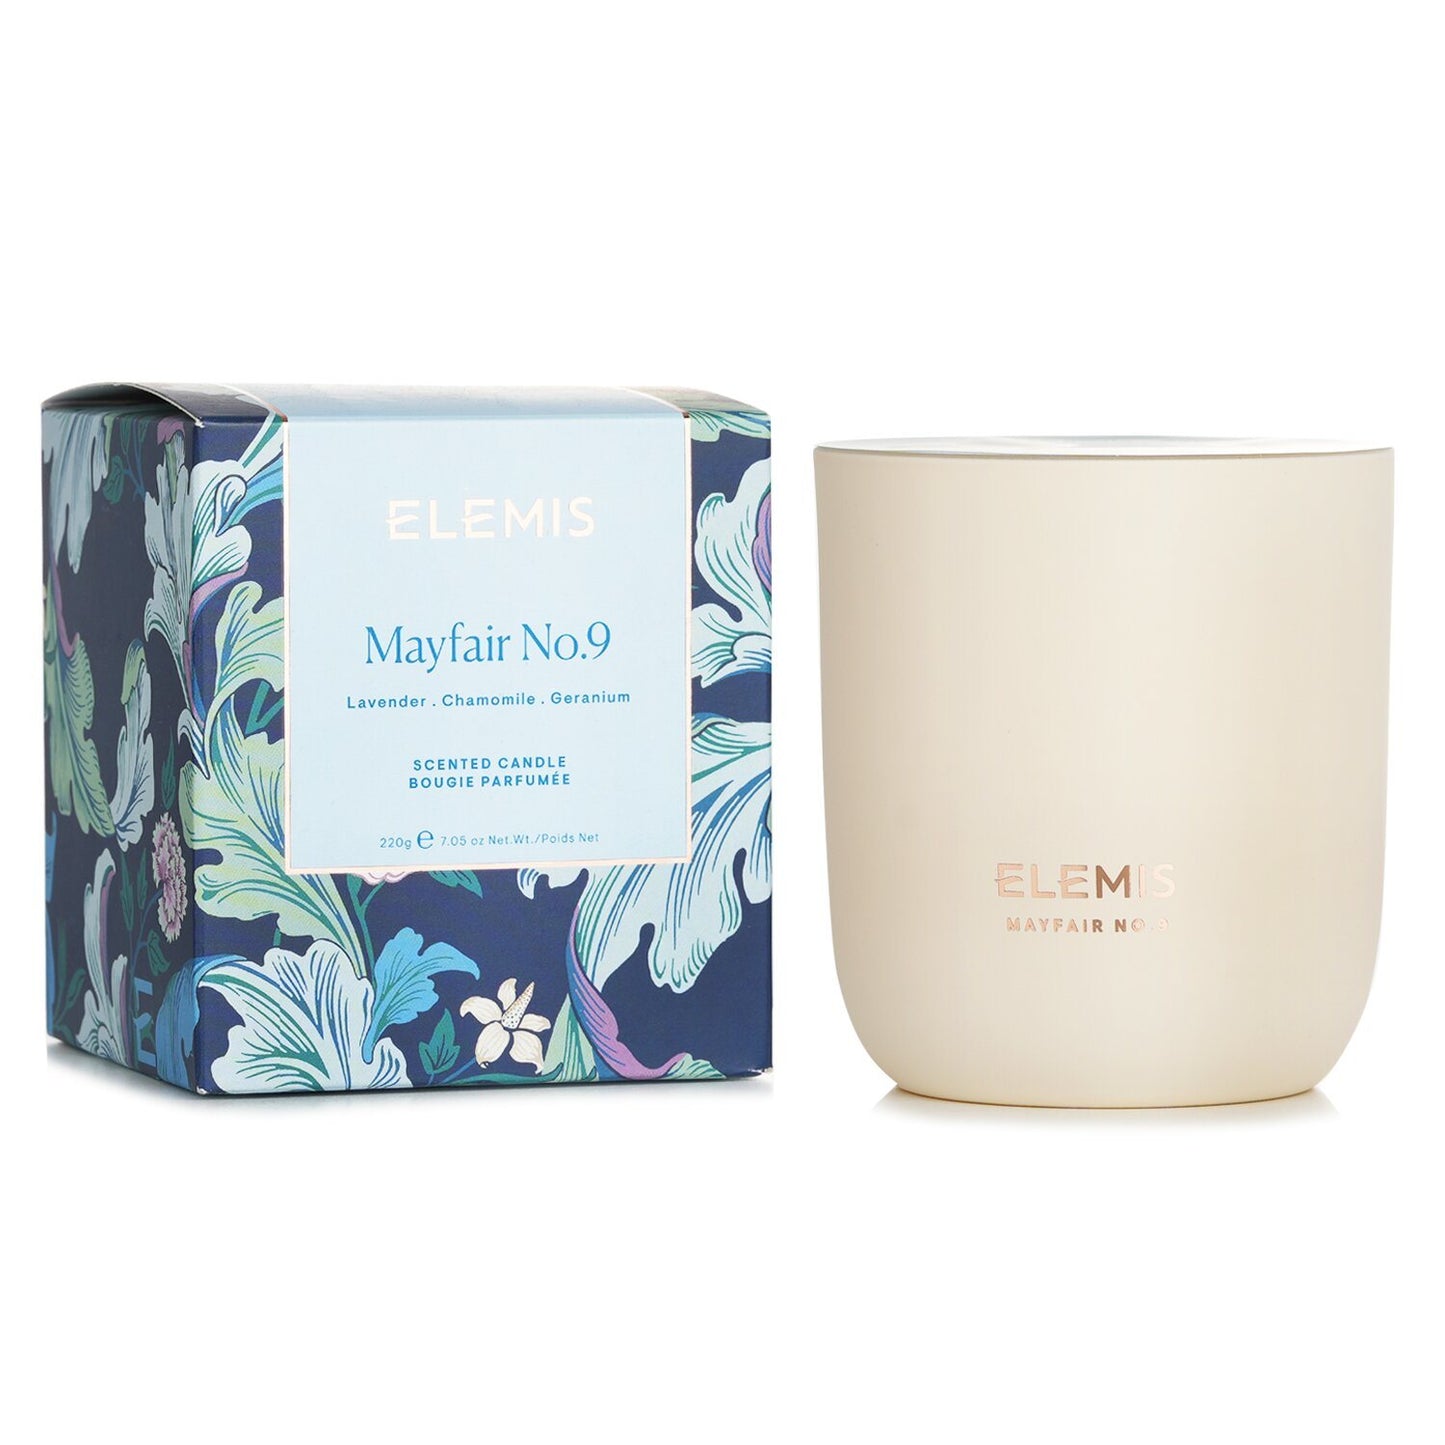 ELEMIS - Scented Candle - Mayfair No.9 888931 220g/7.05oz - lolaluxeshop